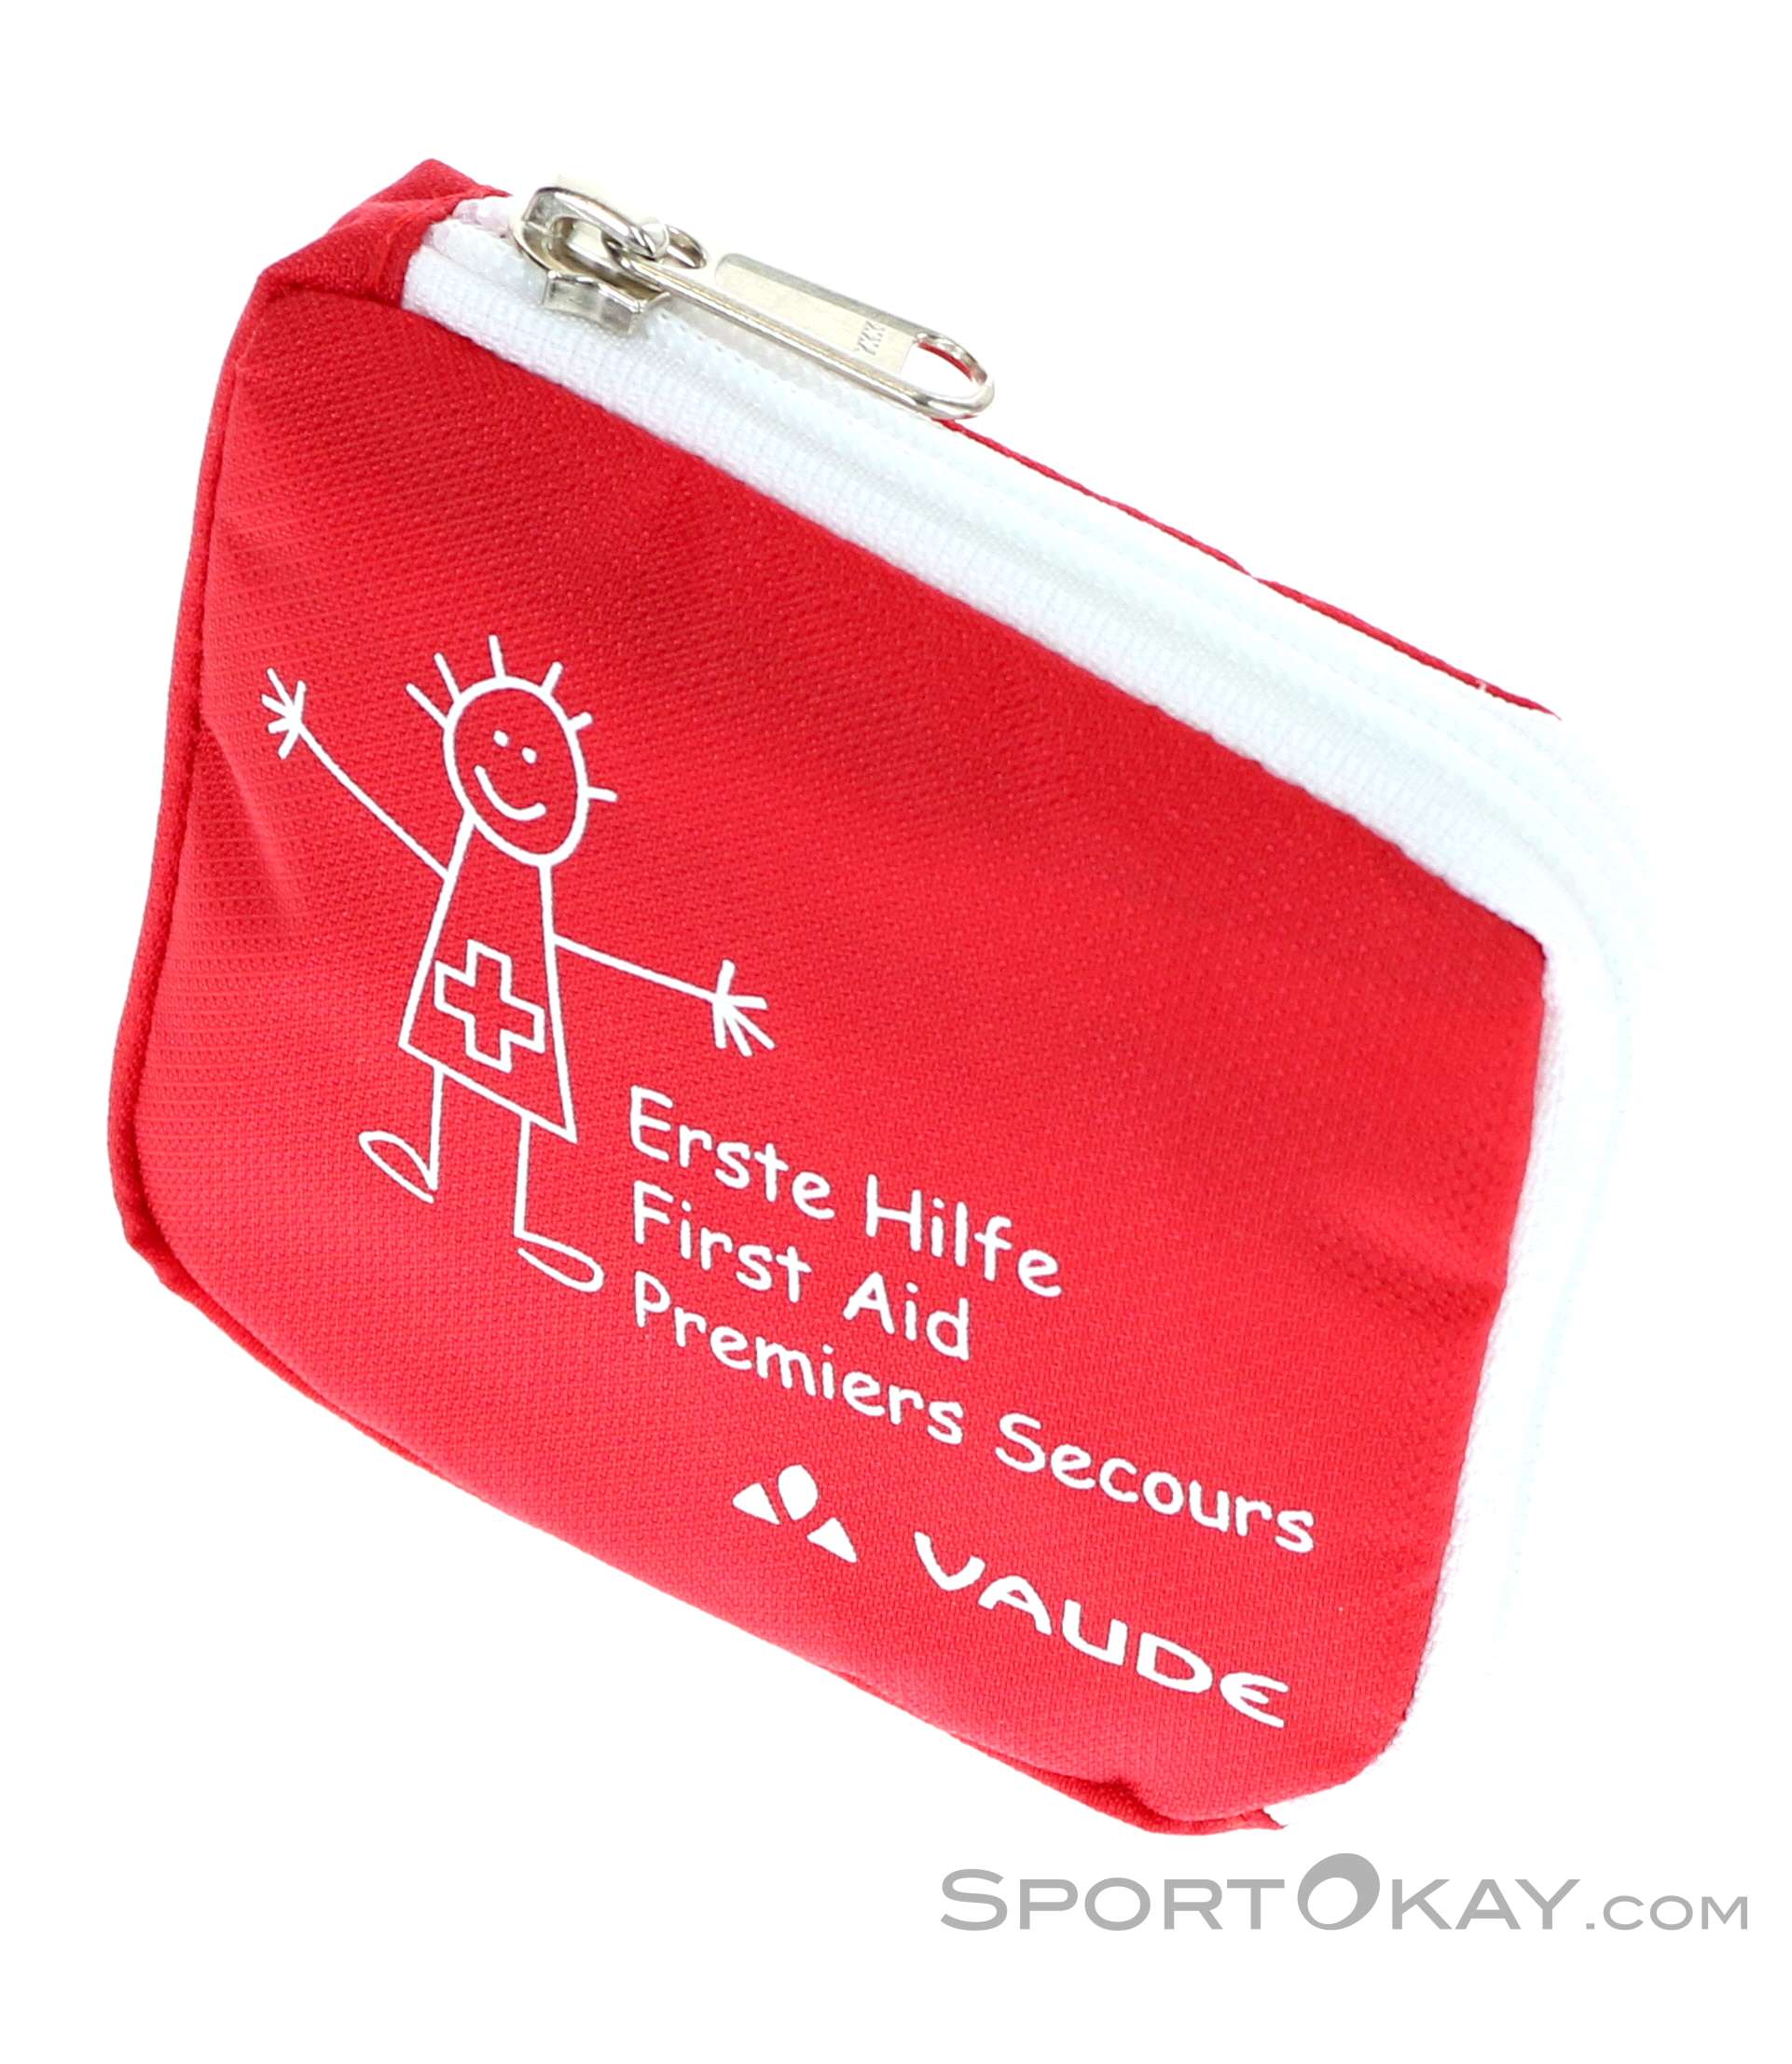 Vaude Kids First Aid Kit - First Aid Kits - Camping - Outdoor - All